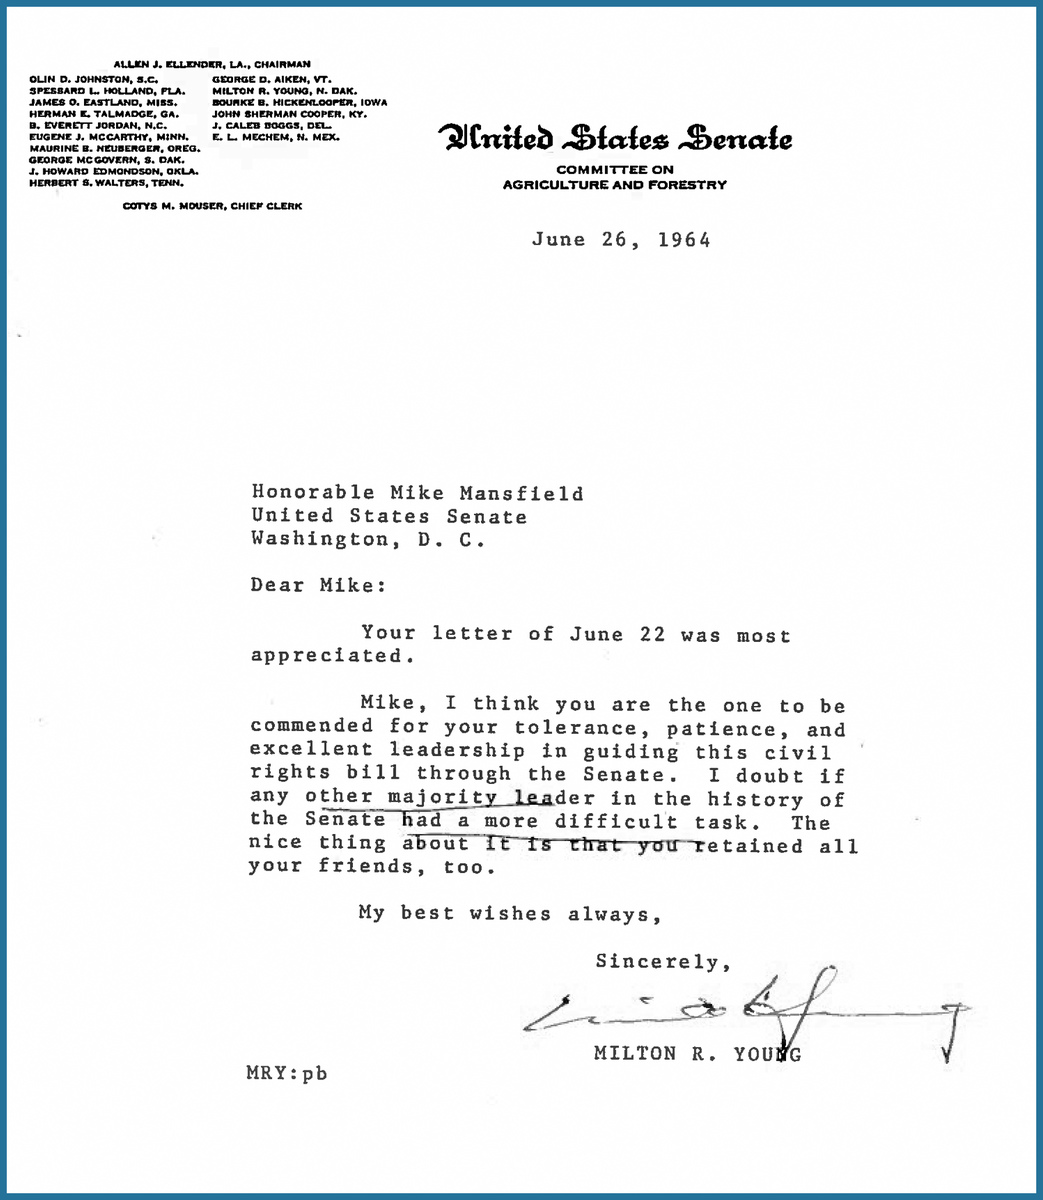 Senator Milton Young’s letter about the Civil Rights Act